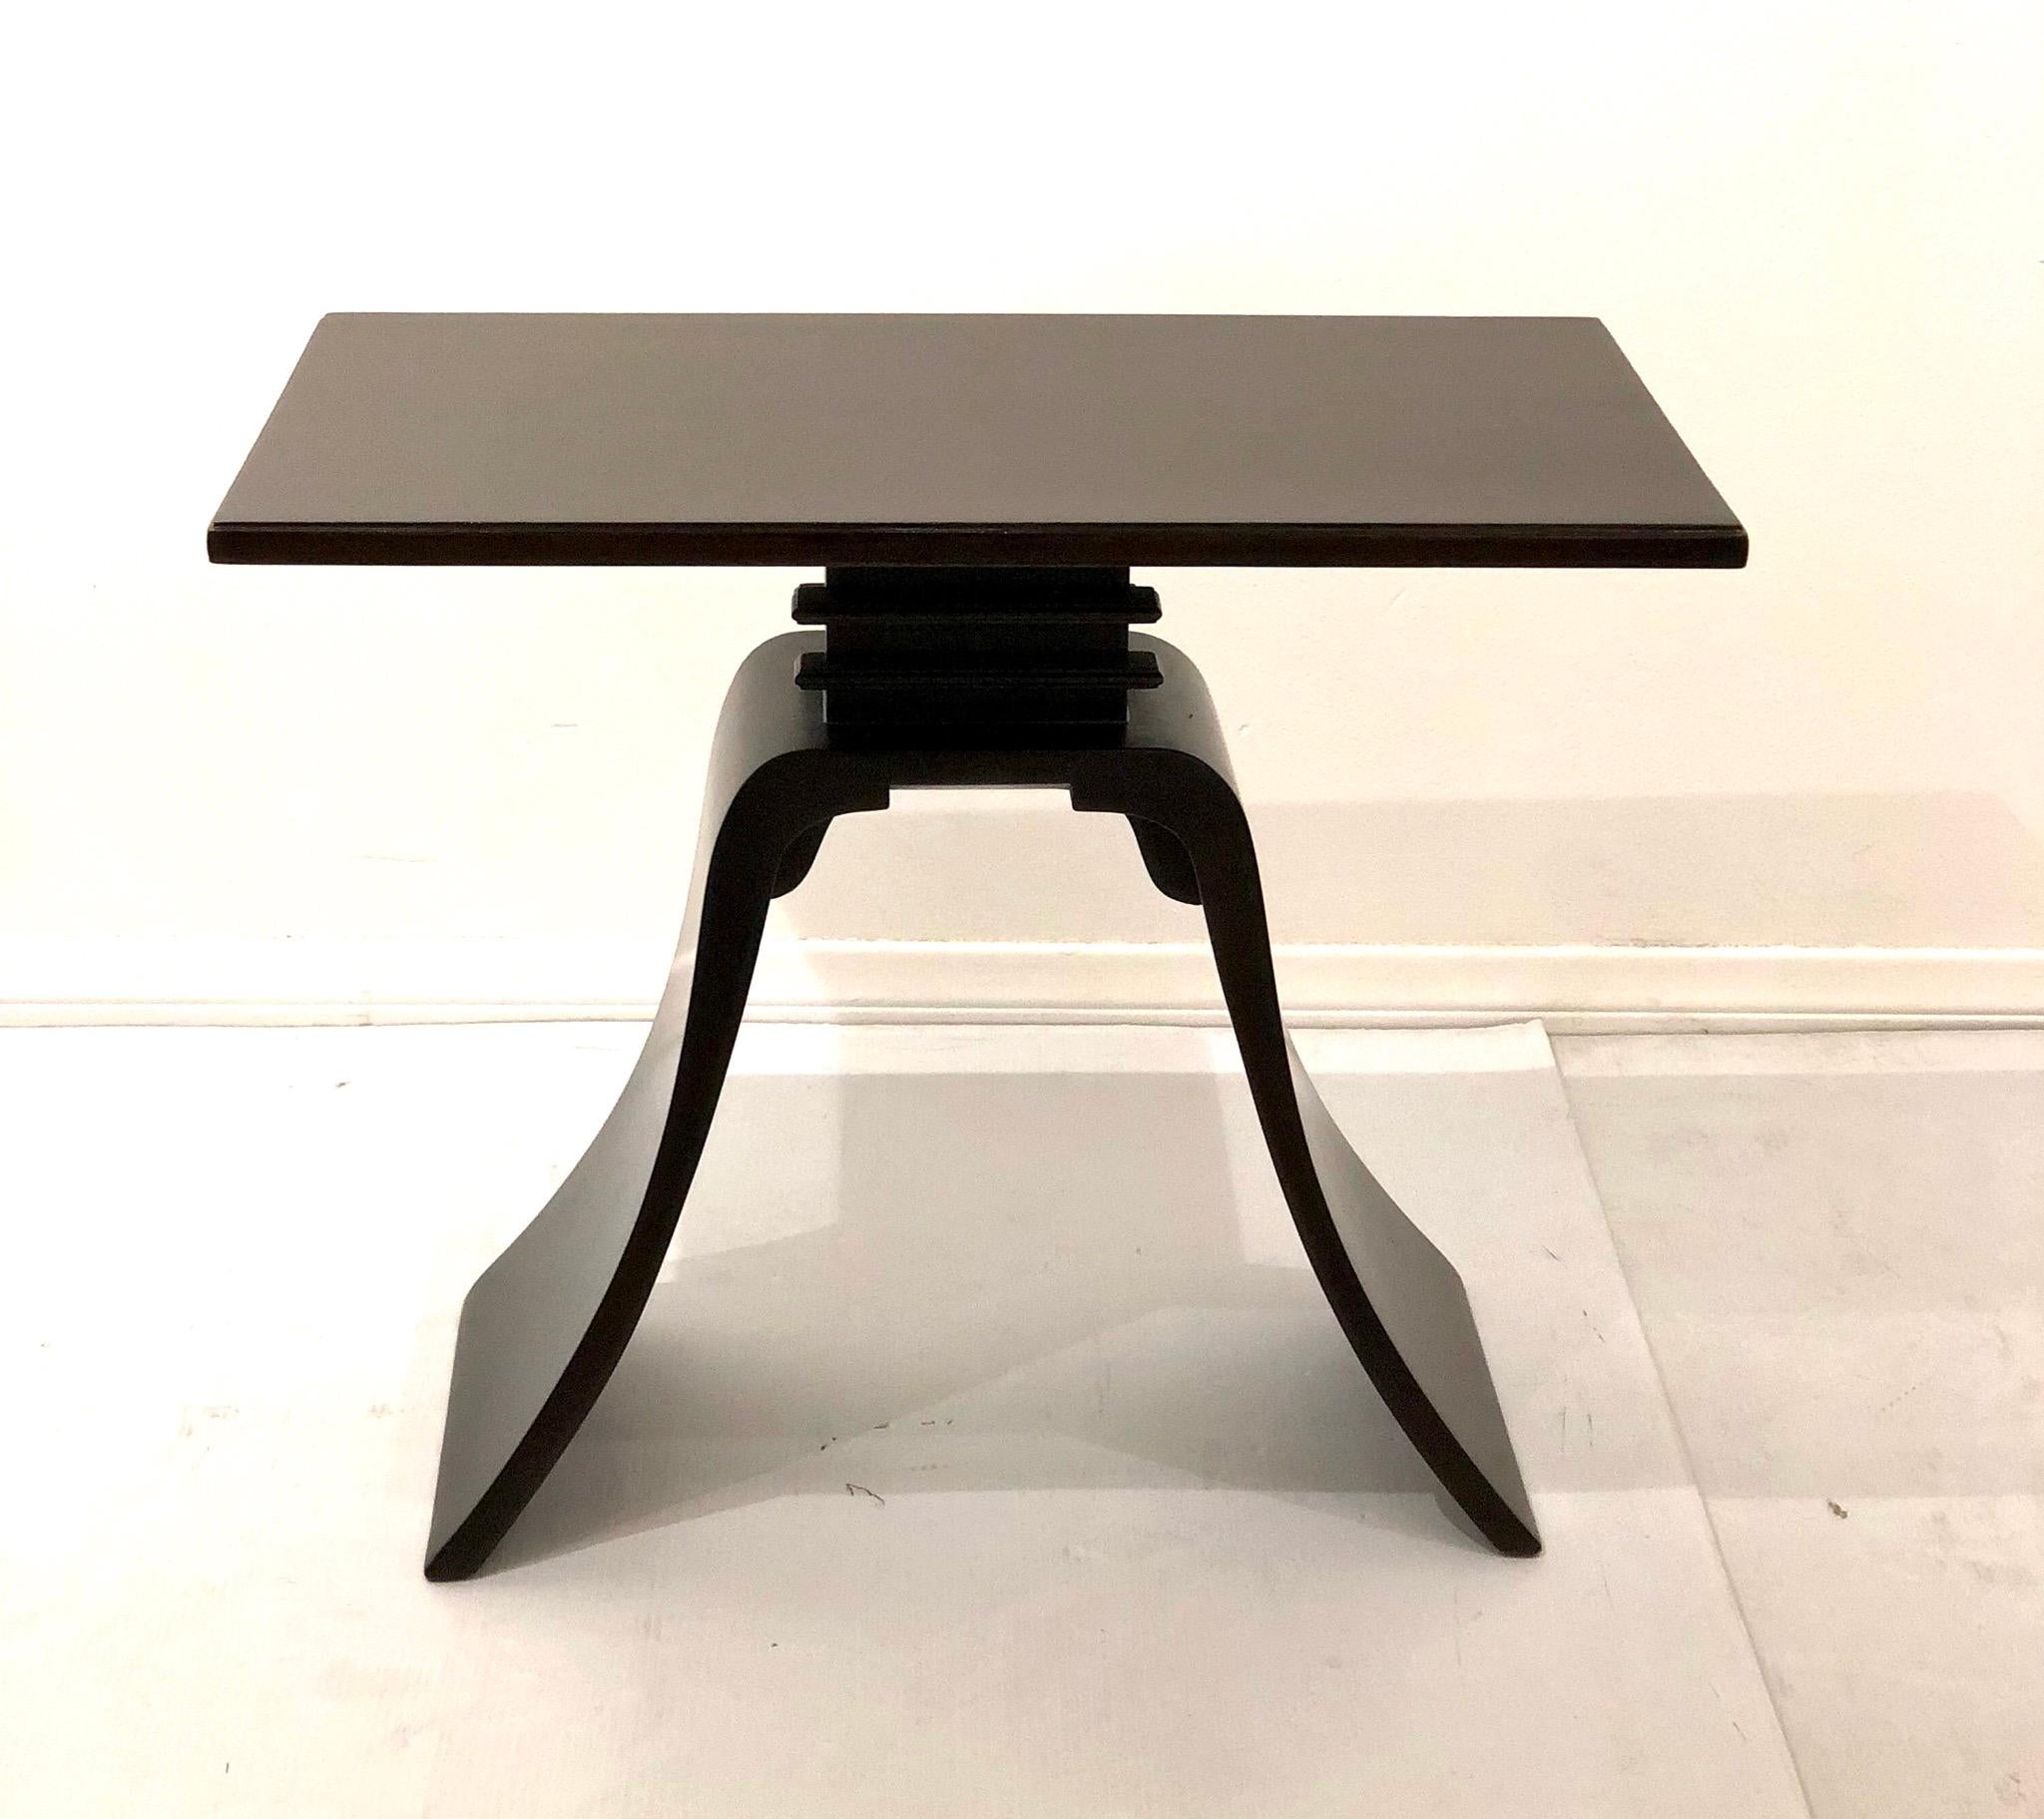 Beautiful Art Deco cocktail table designed by Paul Frankl, freshly refinished in dark chocolate finish great design and lines.